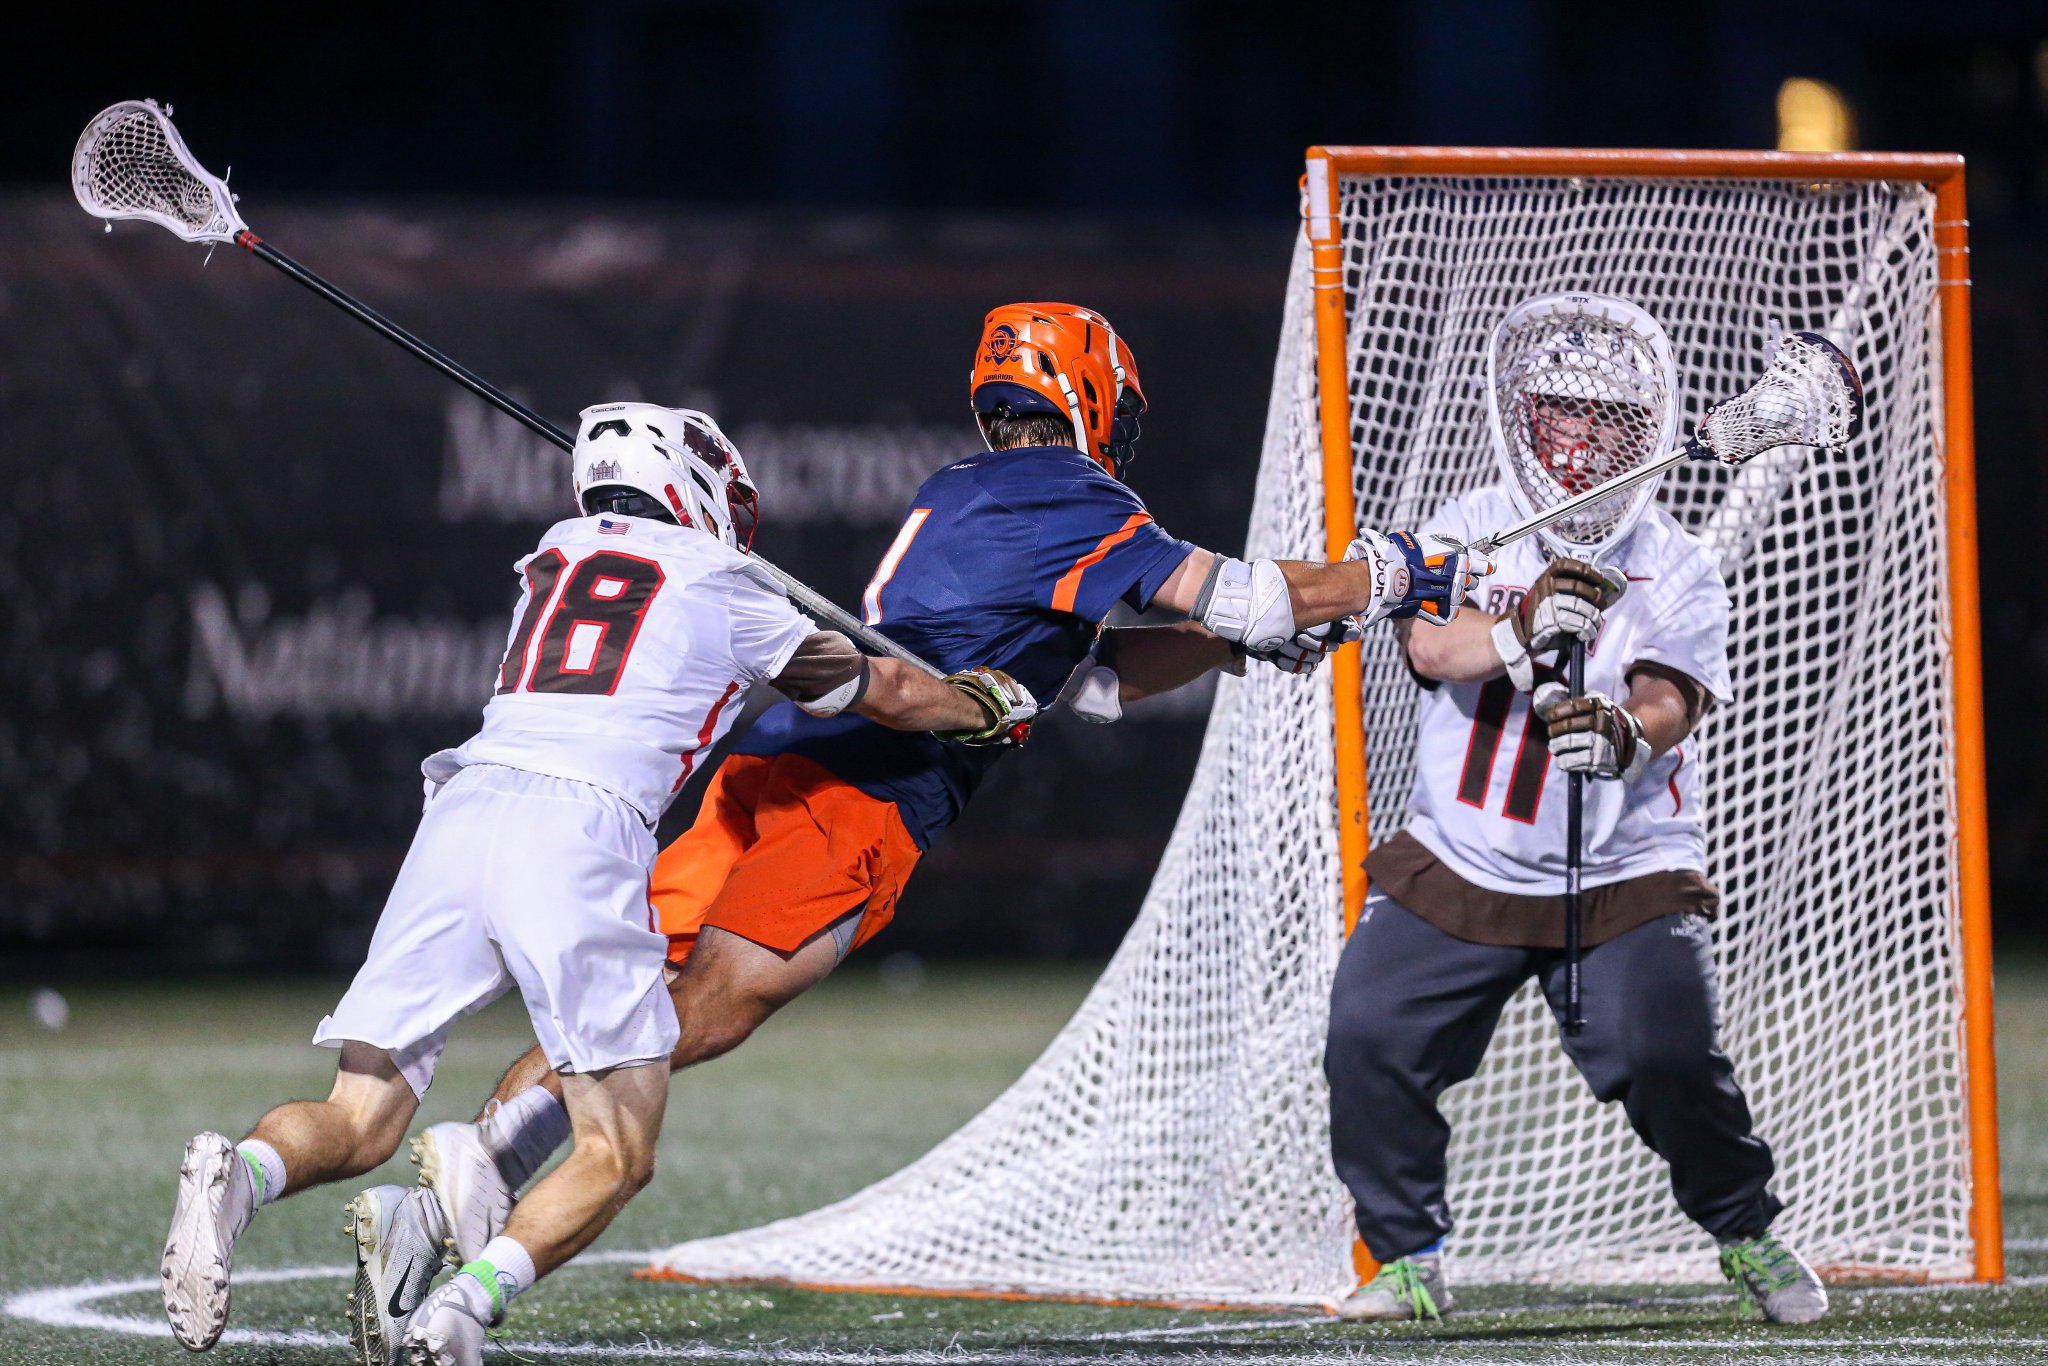 Second-Half Cavalanche Propels Virginia to 17-10 Win at No. 8 Brown in NCAA First Round